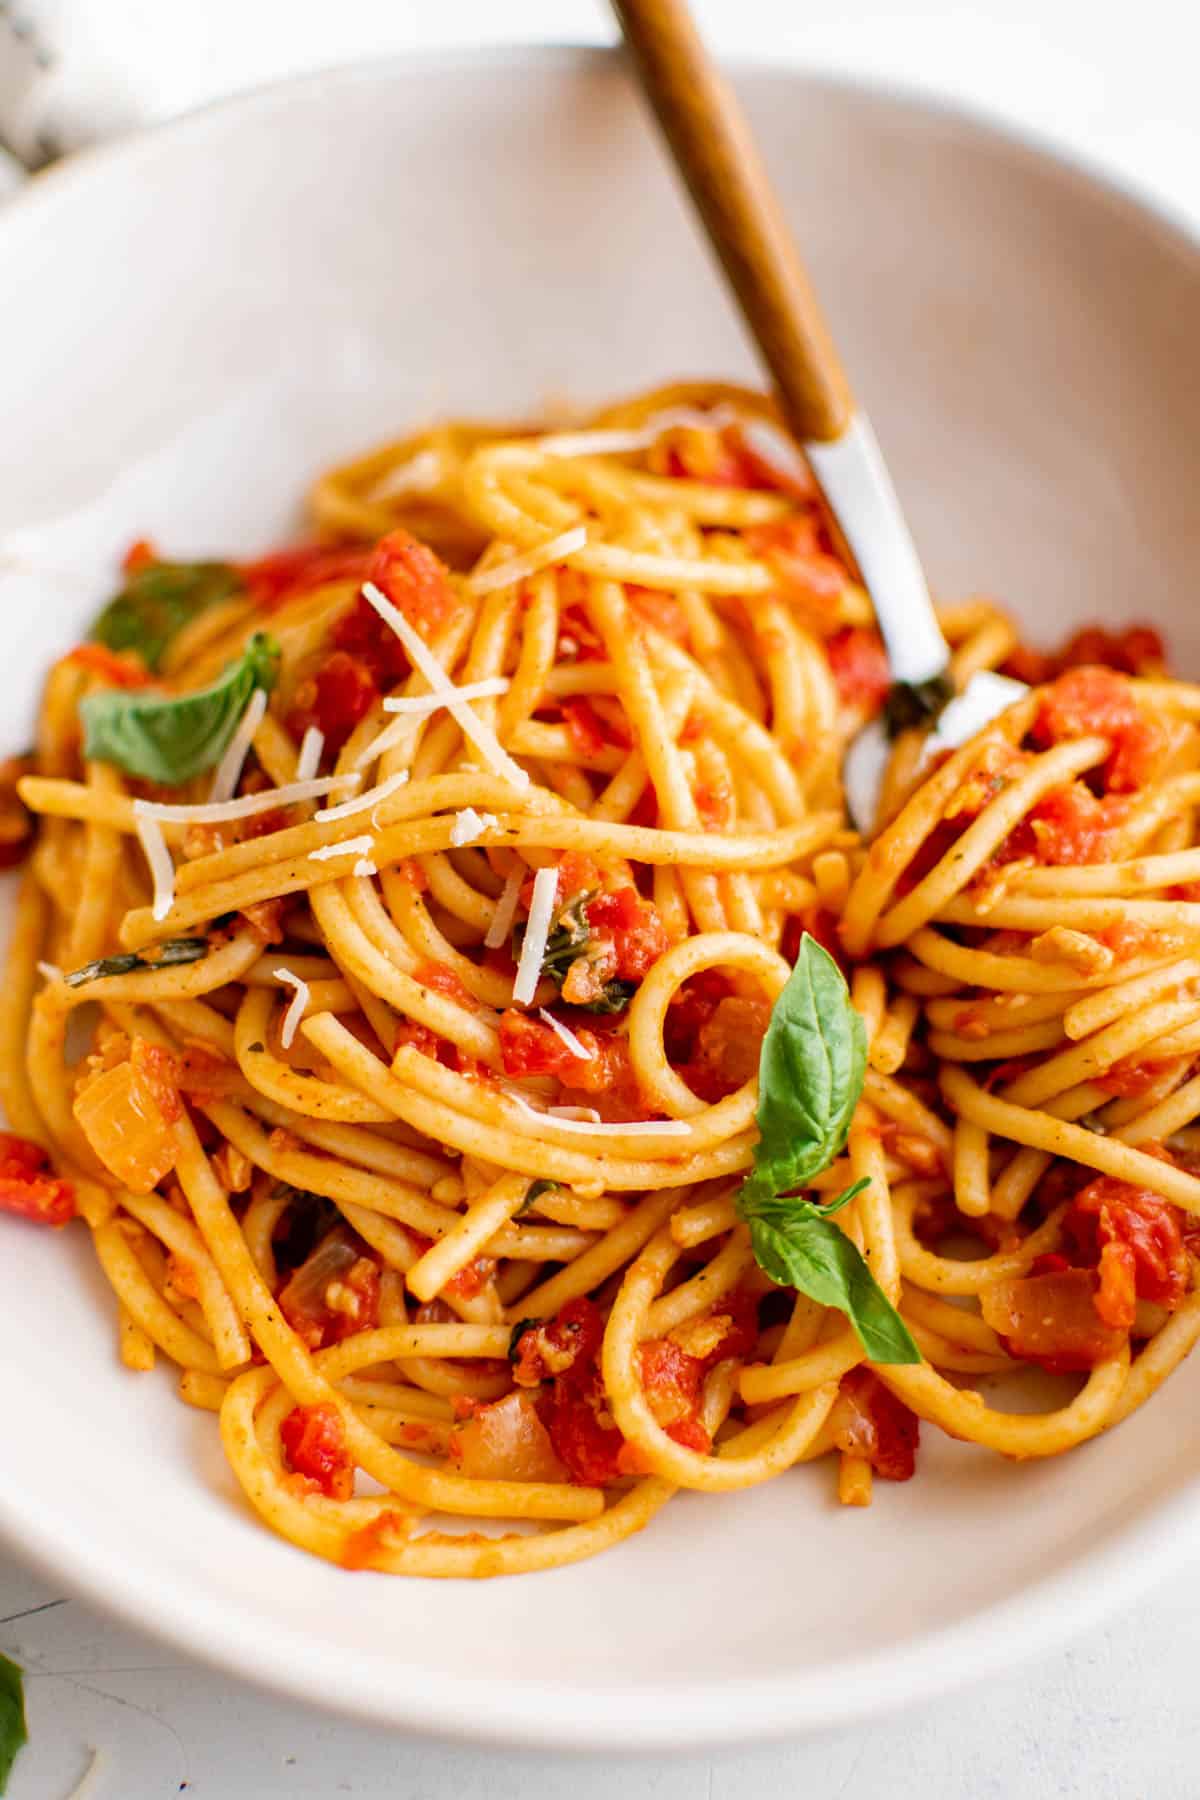 A plate filled with spaghetti arrabbiata and freshly shaved Parmesan cheese. A spoon sits in the dish for eating.